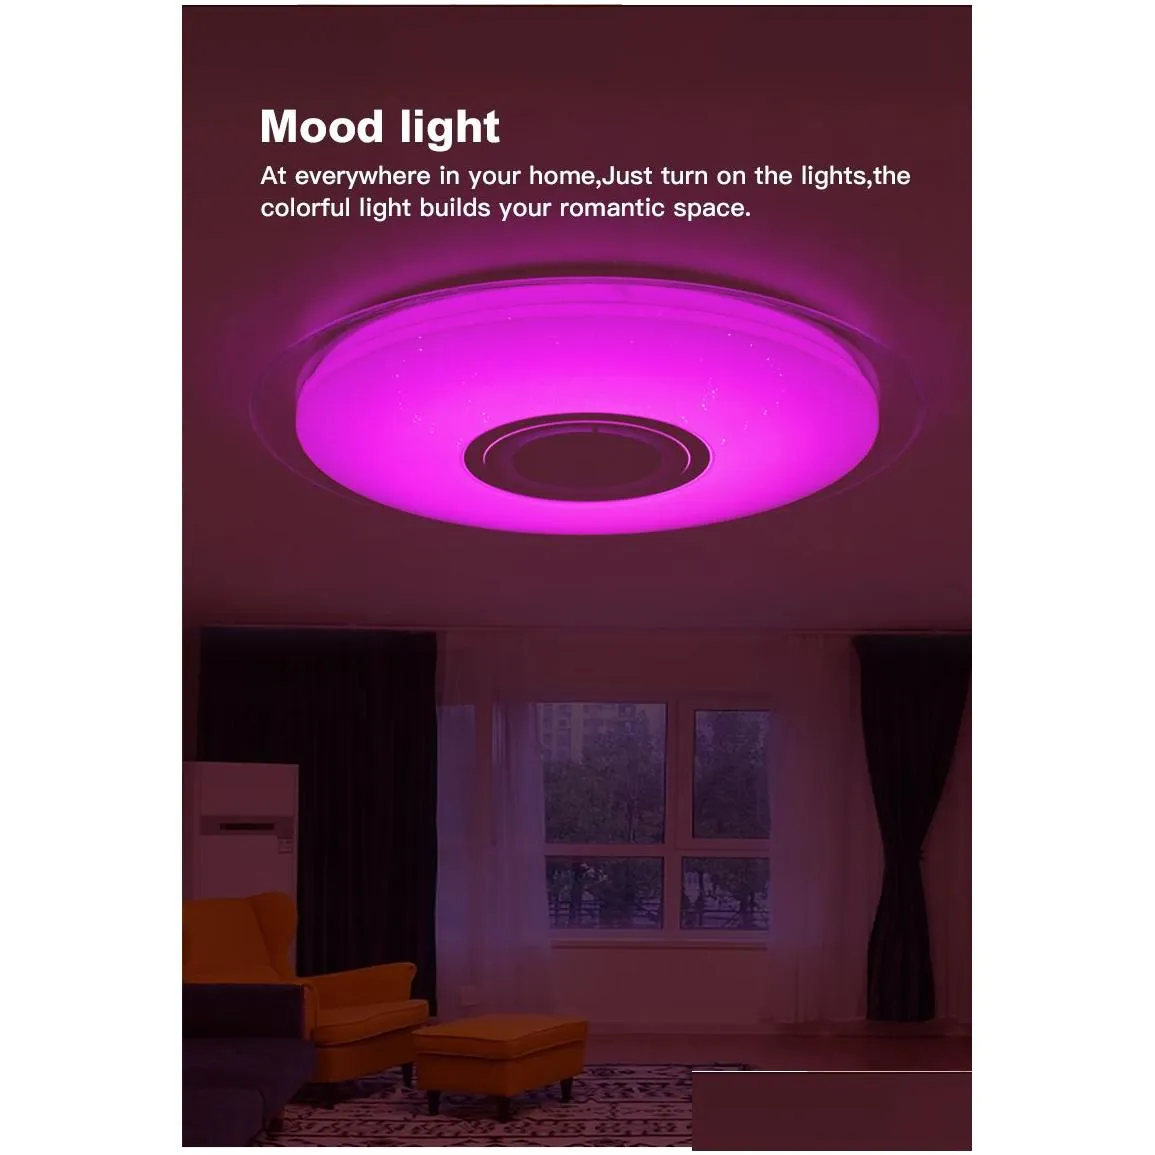 Ceiling Lights Modern Led Ceiling Lights Rgb Dimmable 25W 36W 52W App Remote Control Bluetooth Music Light Foyer Bedroom Smart Lamp282 Dh5Os